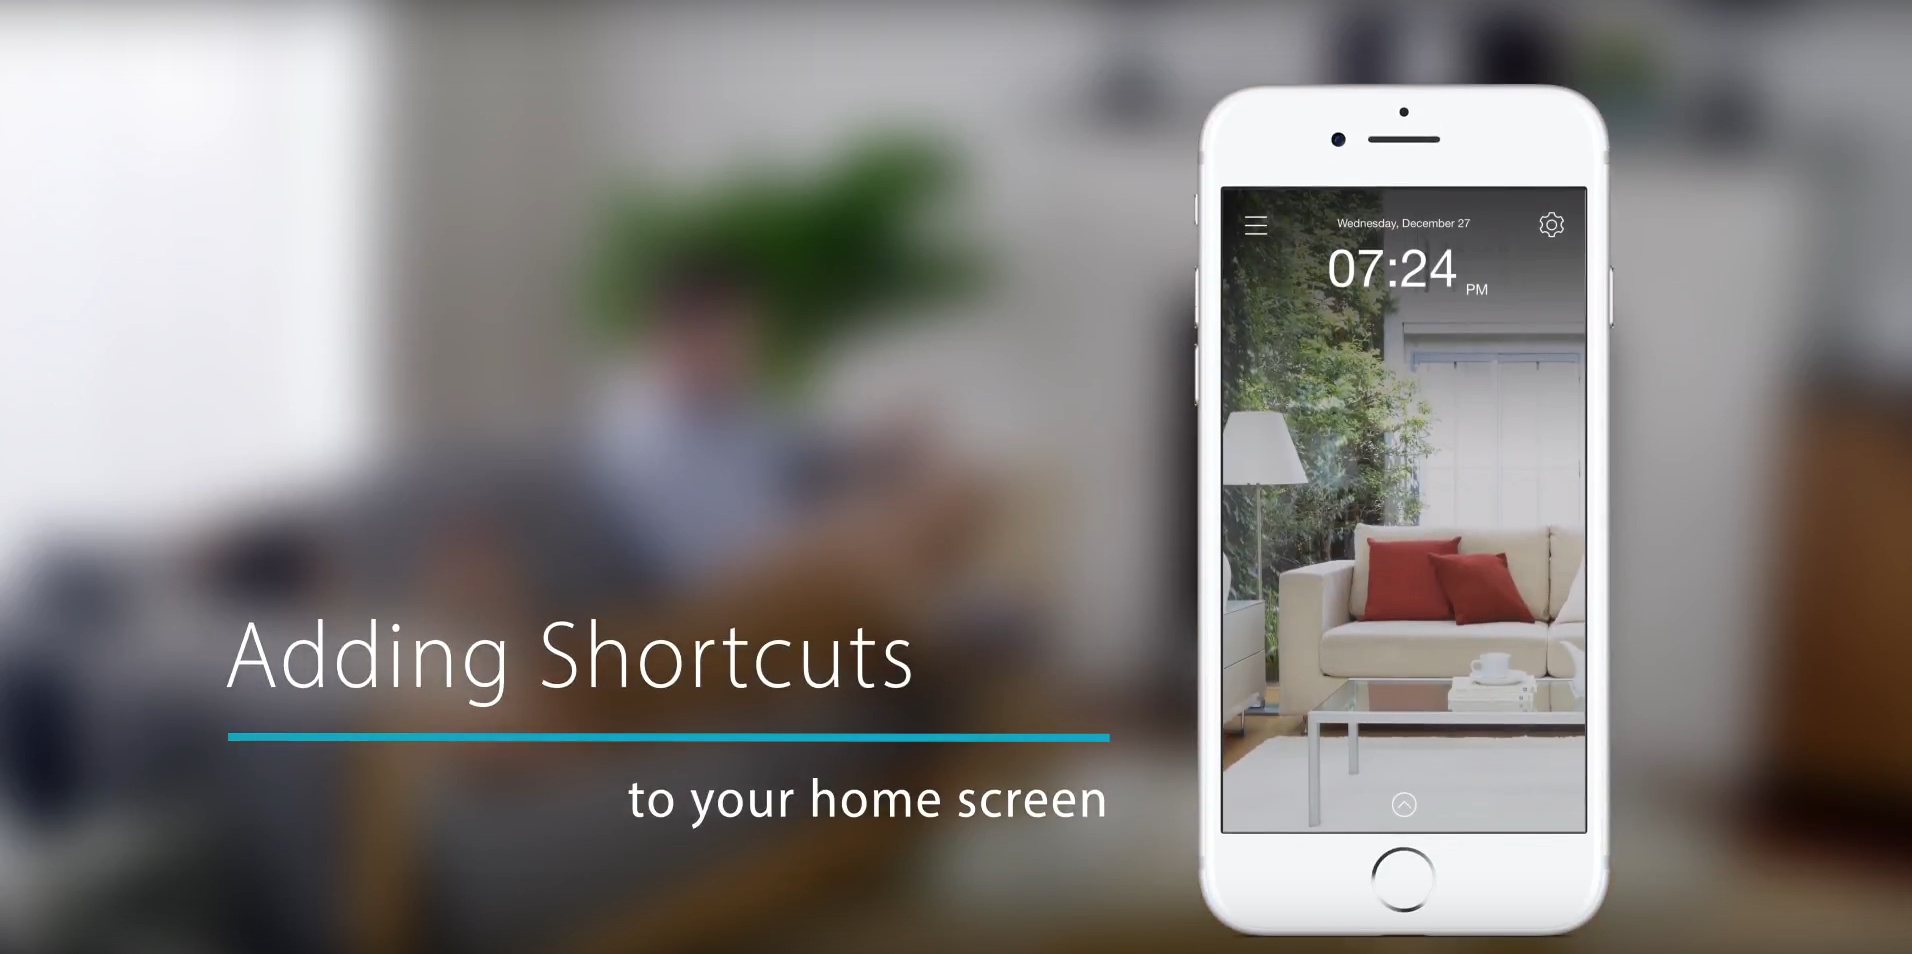 mydlink video setup tutorial - Adding Shortcuts to your home screen